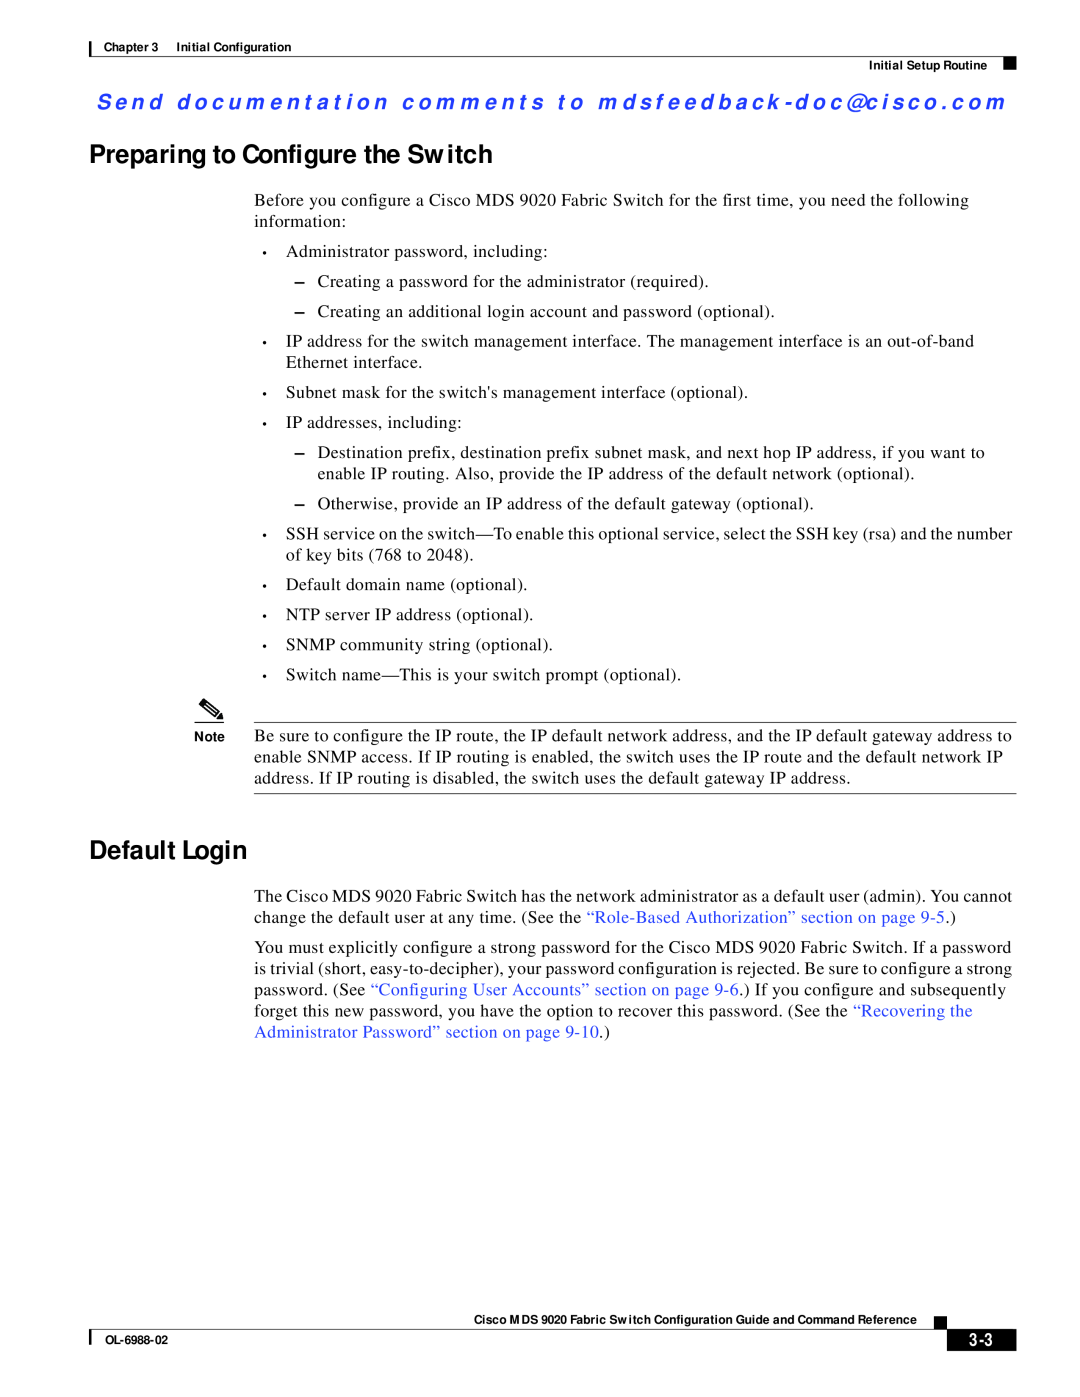 Cisco Systems MDS 9020 manual Preparing to Configure the Switch, Default Login 